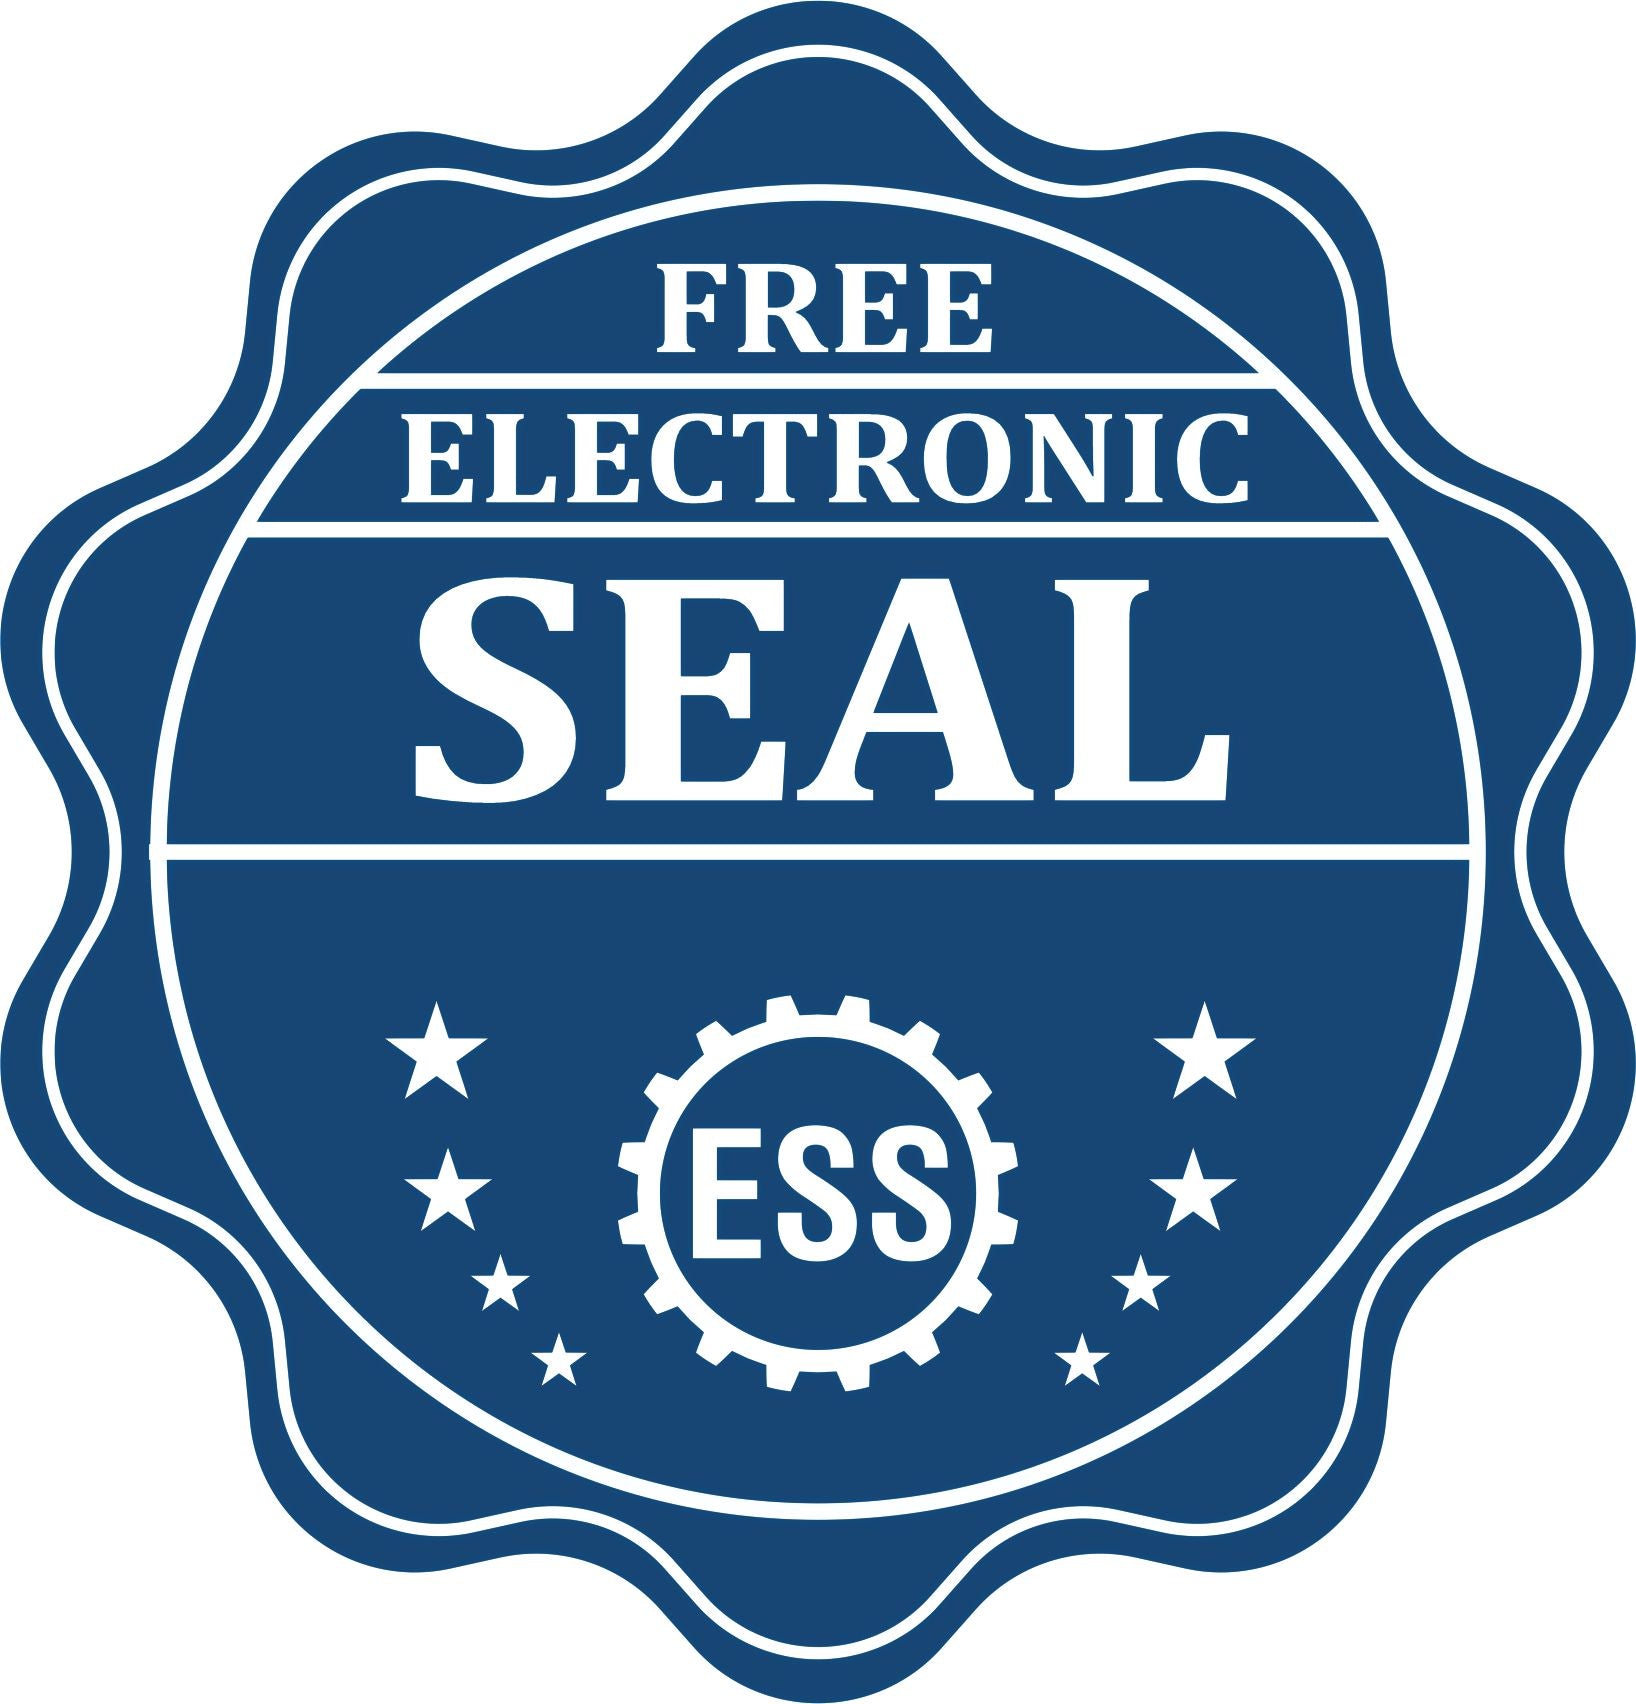 A badge showing a free electronic seal for the Gift South Carolina Engineer Seal with stars and the ESS gear on the emblem.